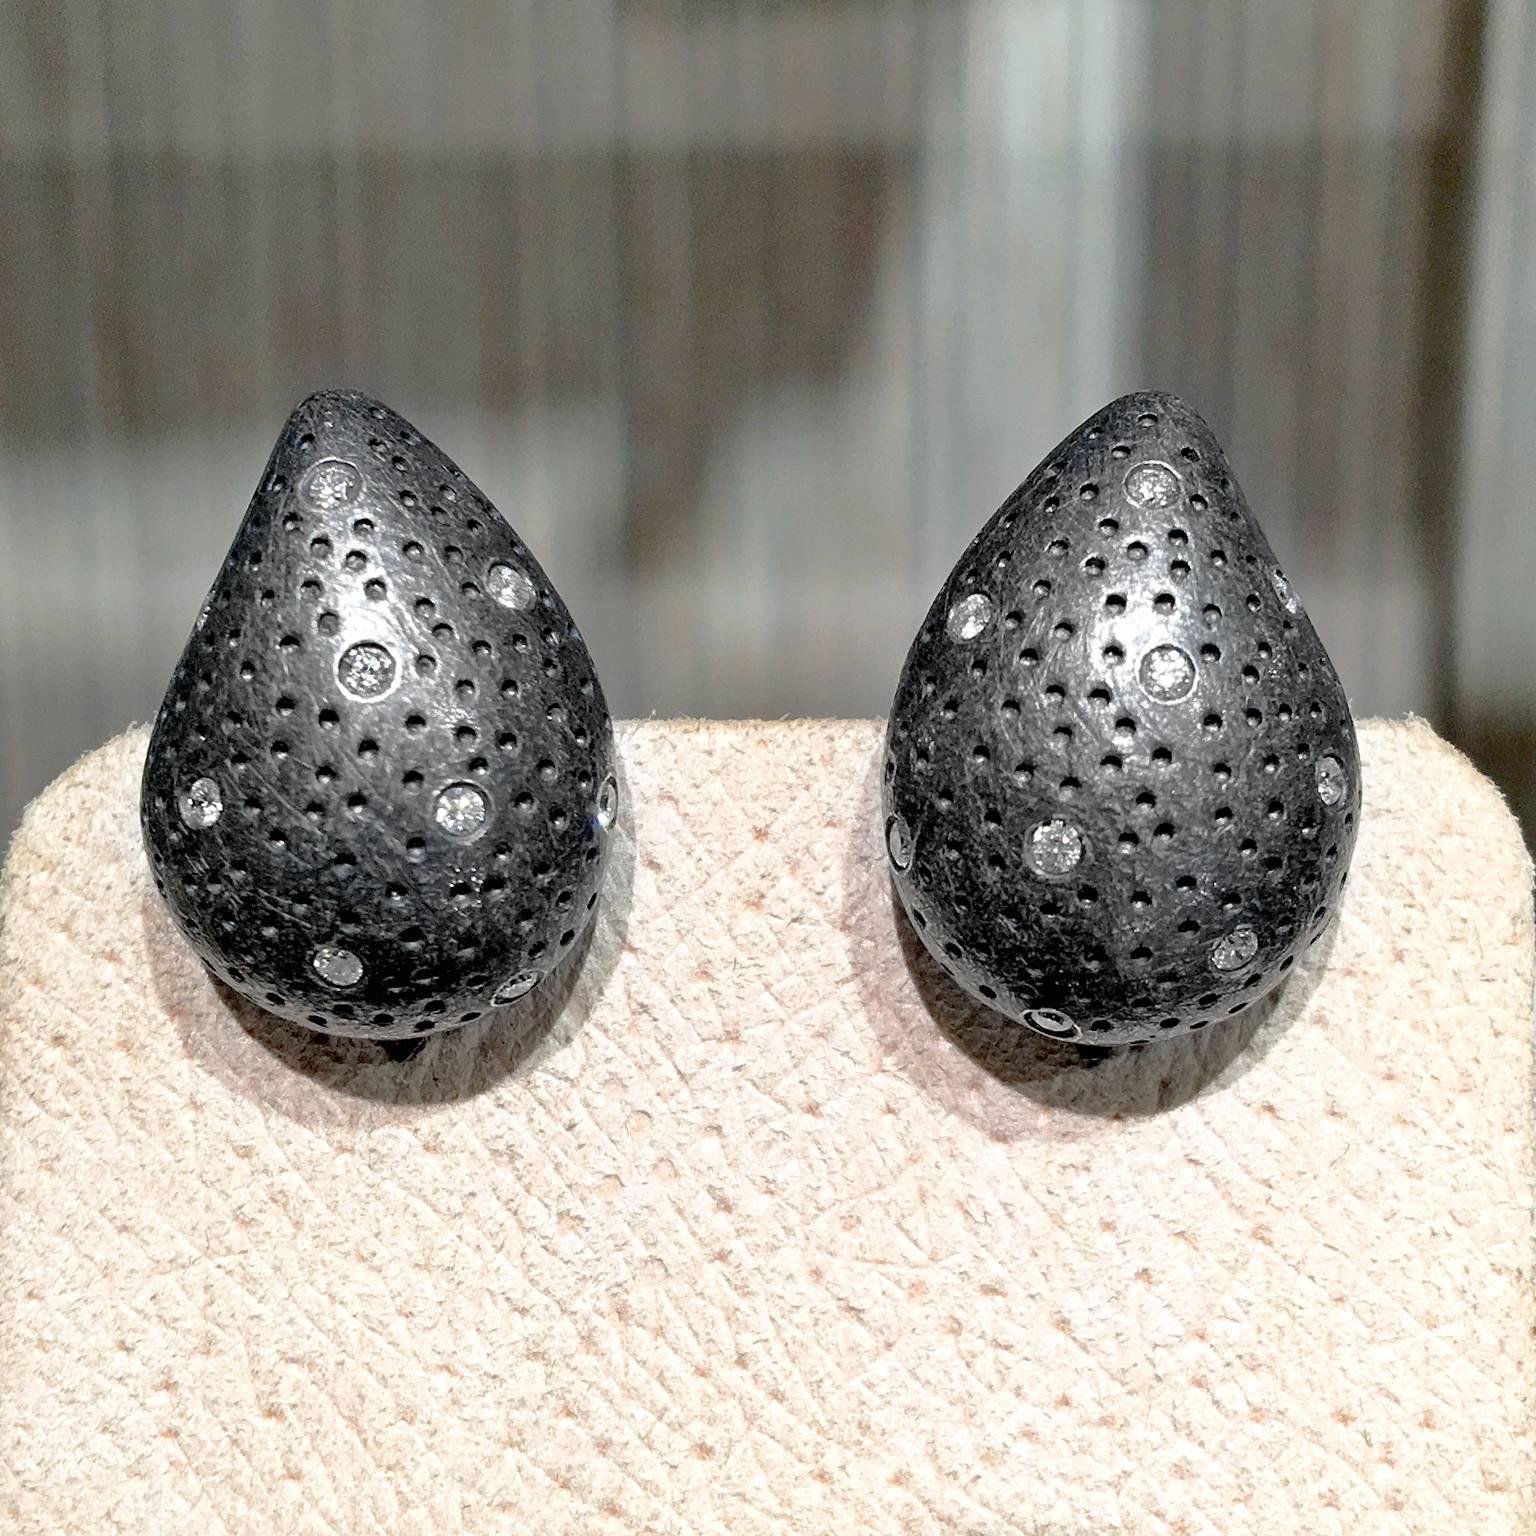 Diamond Dust Paisley Clip Earrings handcrafted by renowned jewelry artist Pedro Boregaard in highly-textured and matte-finished oxidized sterling silver with twenty round brilliant-cut white diamonds weighing a total of 0.30 carats on ornamental